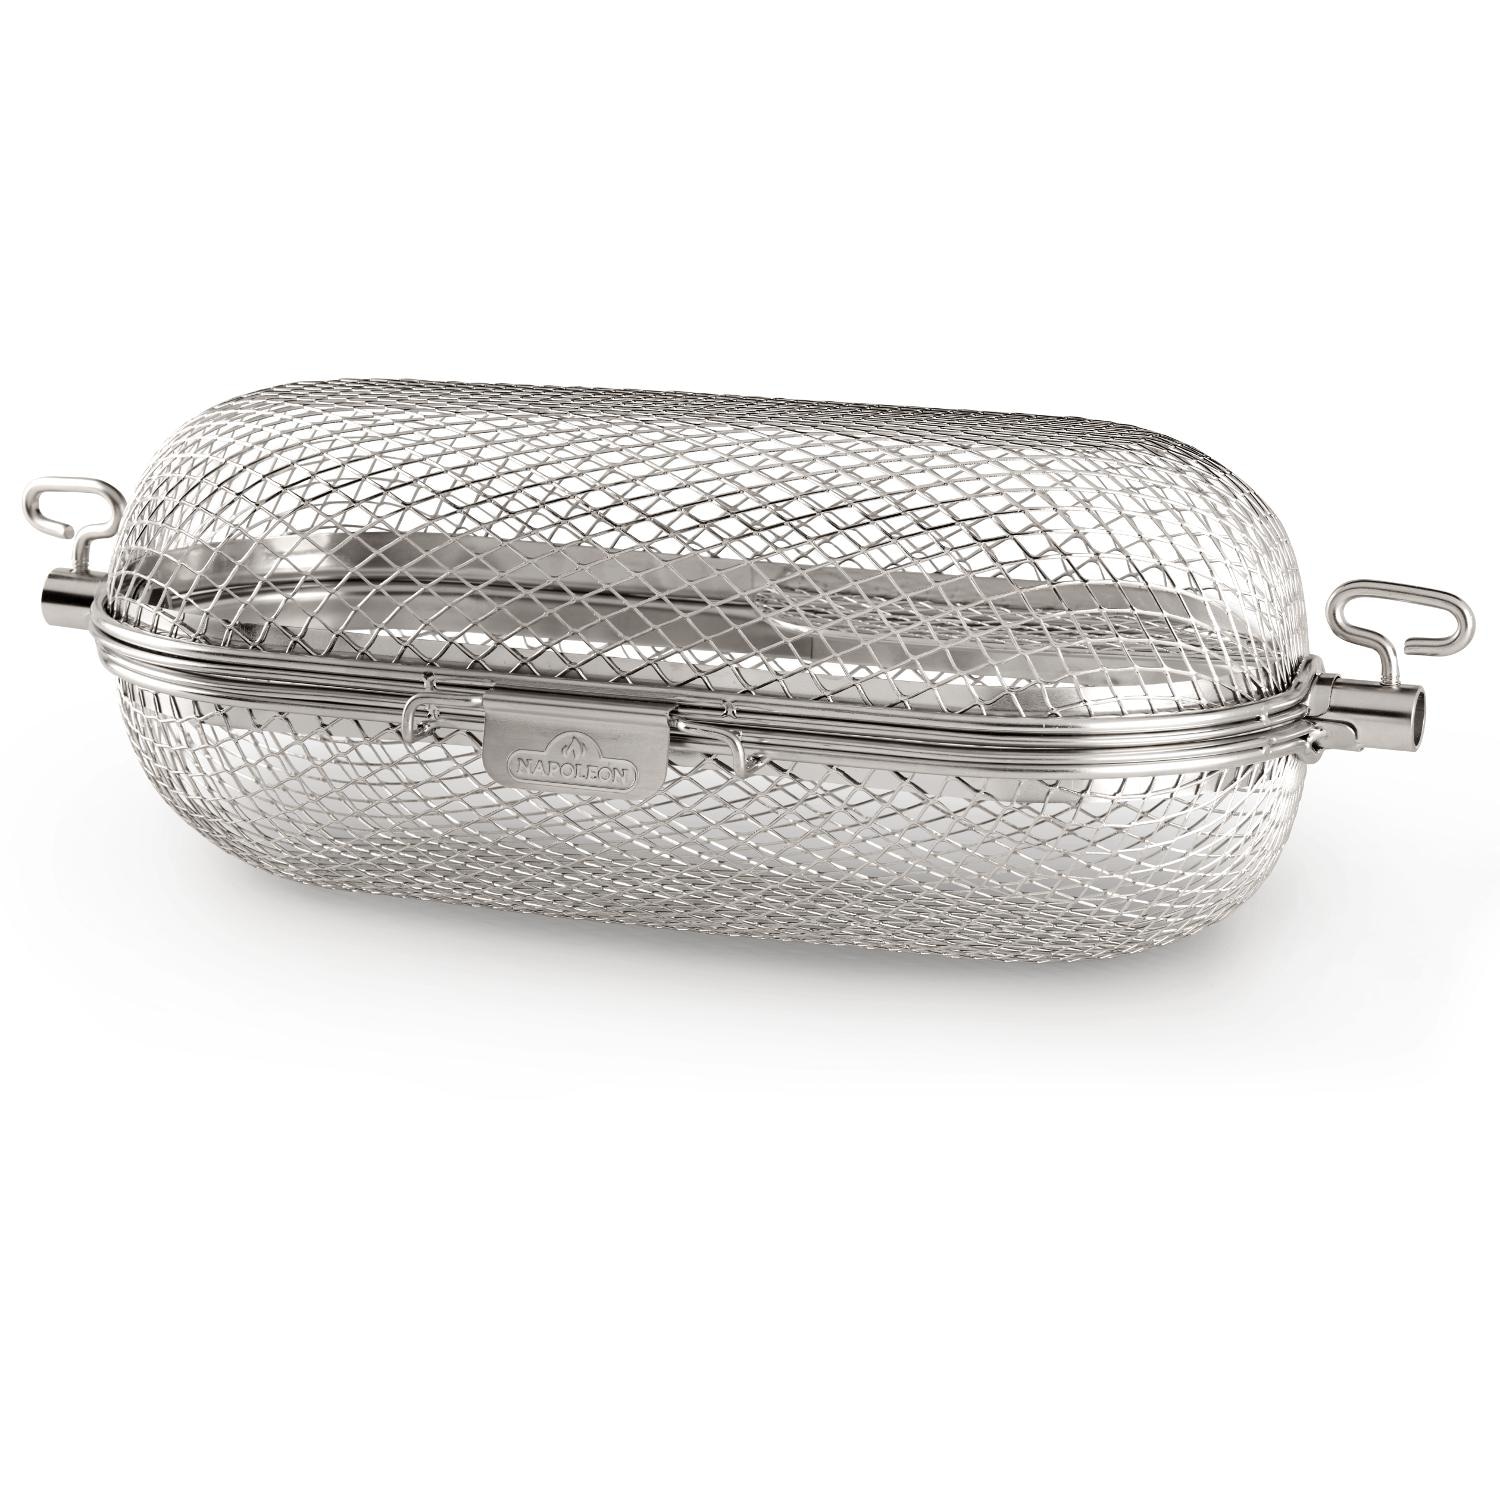 Napoleon Products WS-64000 Food Grade Stainless Steel Rotisserie Grill Basket - image 2 of 3